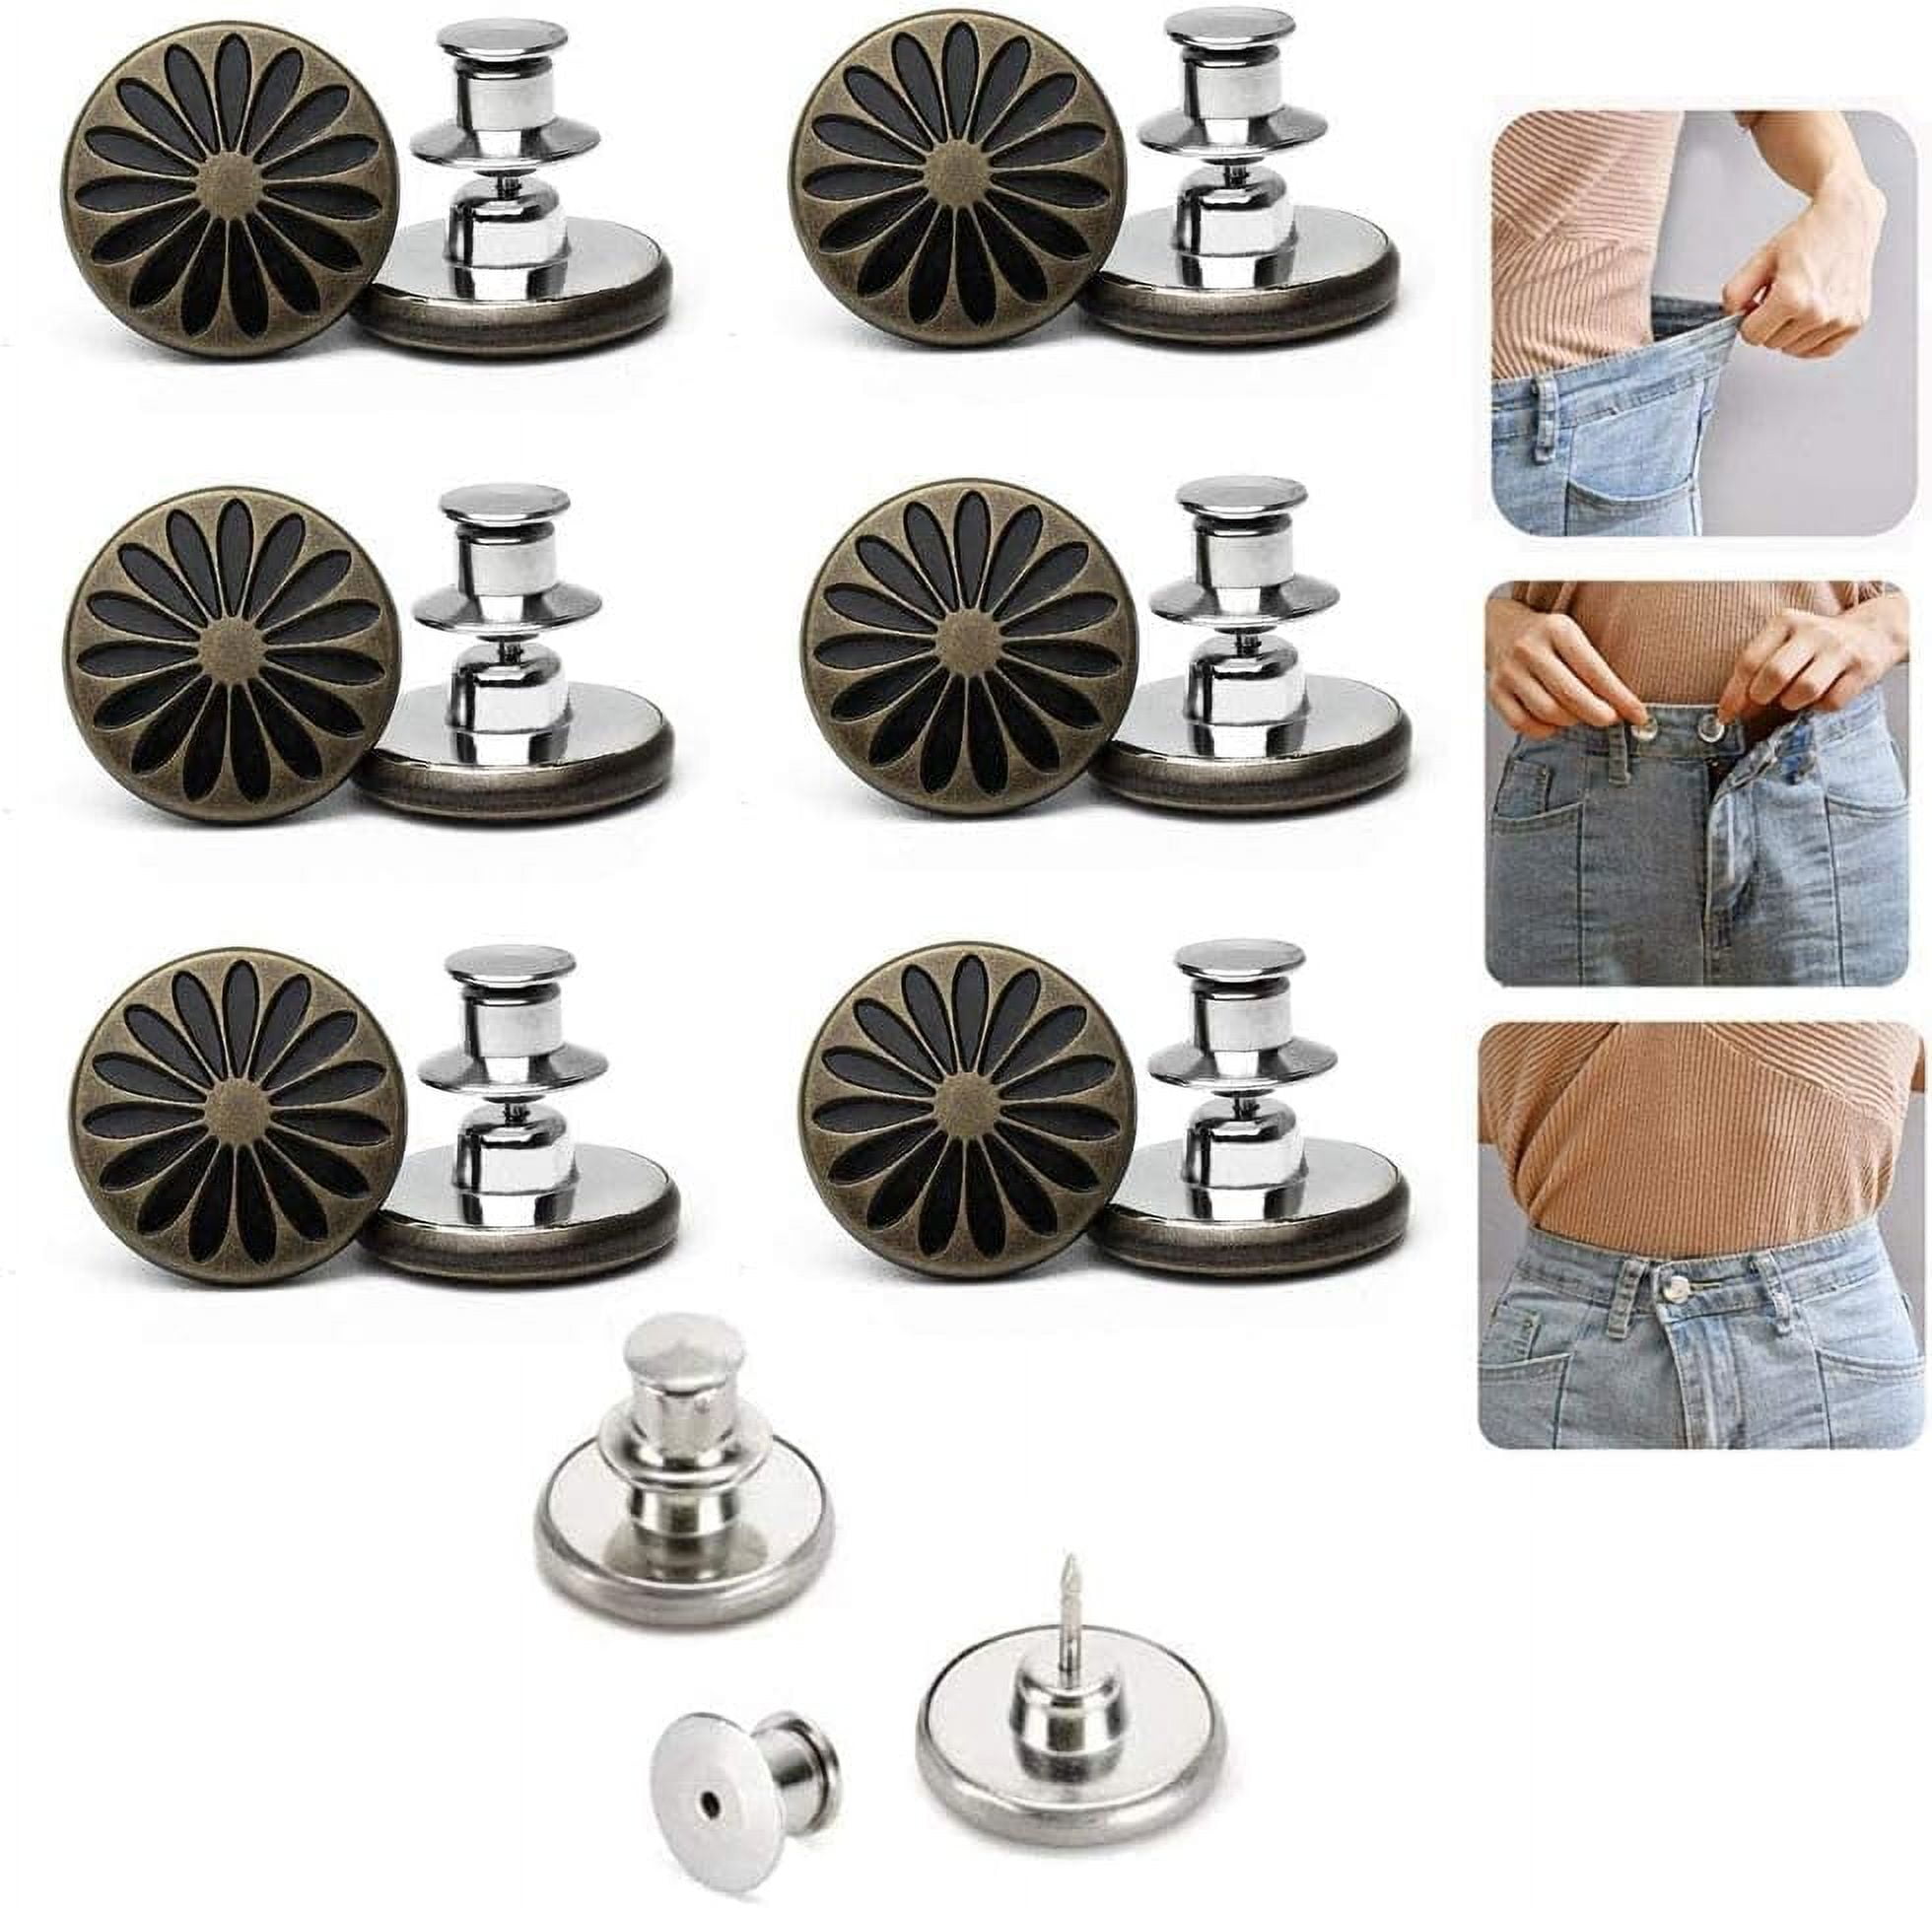 8 PCS Perfect Fit Instant Button, Instant Buttons, Jean Replacement Buttons  Removable Button No Sew Buttons to Extend or Reduce an Inch to Any Pant